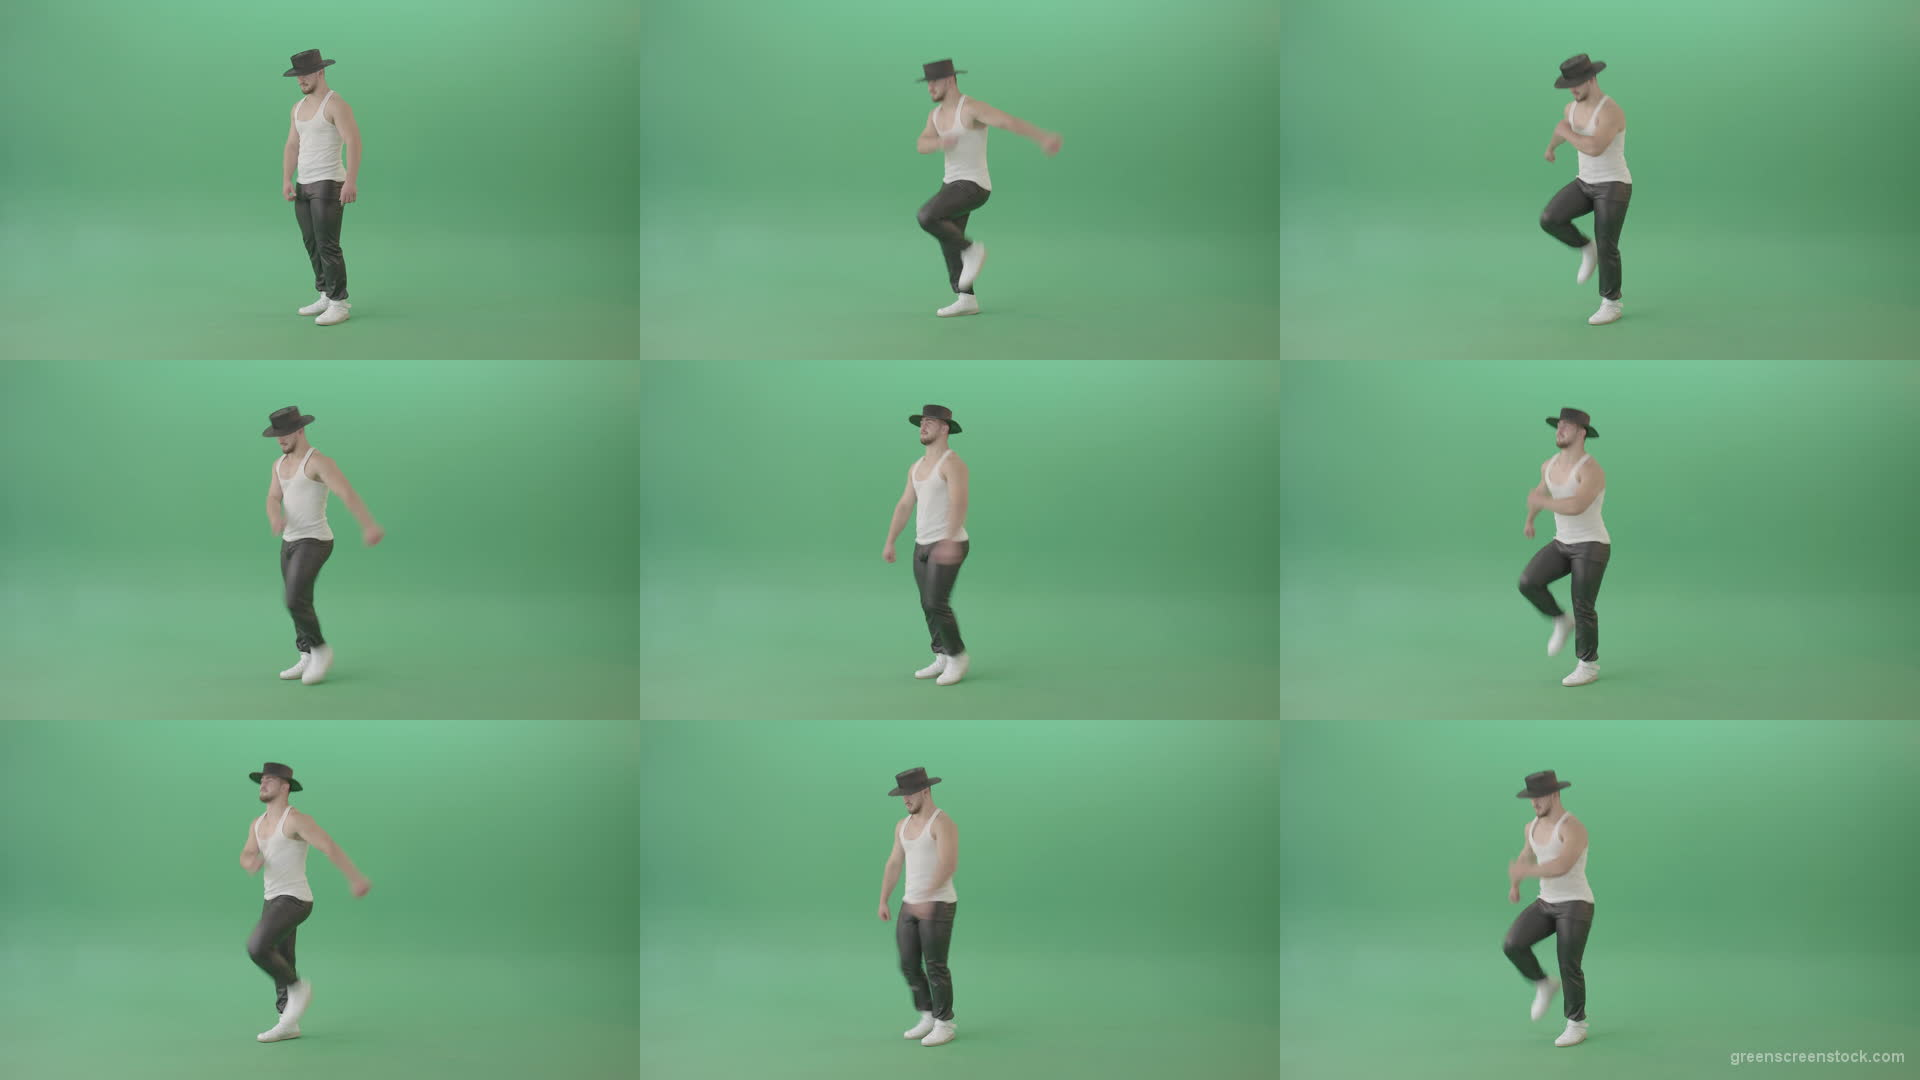 Sport-Man-in-black-hat-dancing-and-marching-fast-isolated-over-Green-Screen-4K-Video-Footage-1920 Green Screen Stock